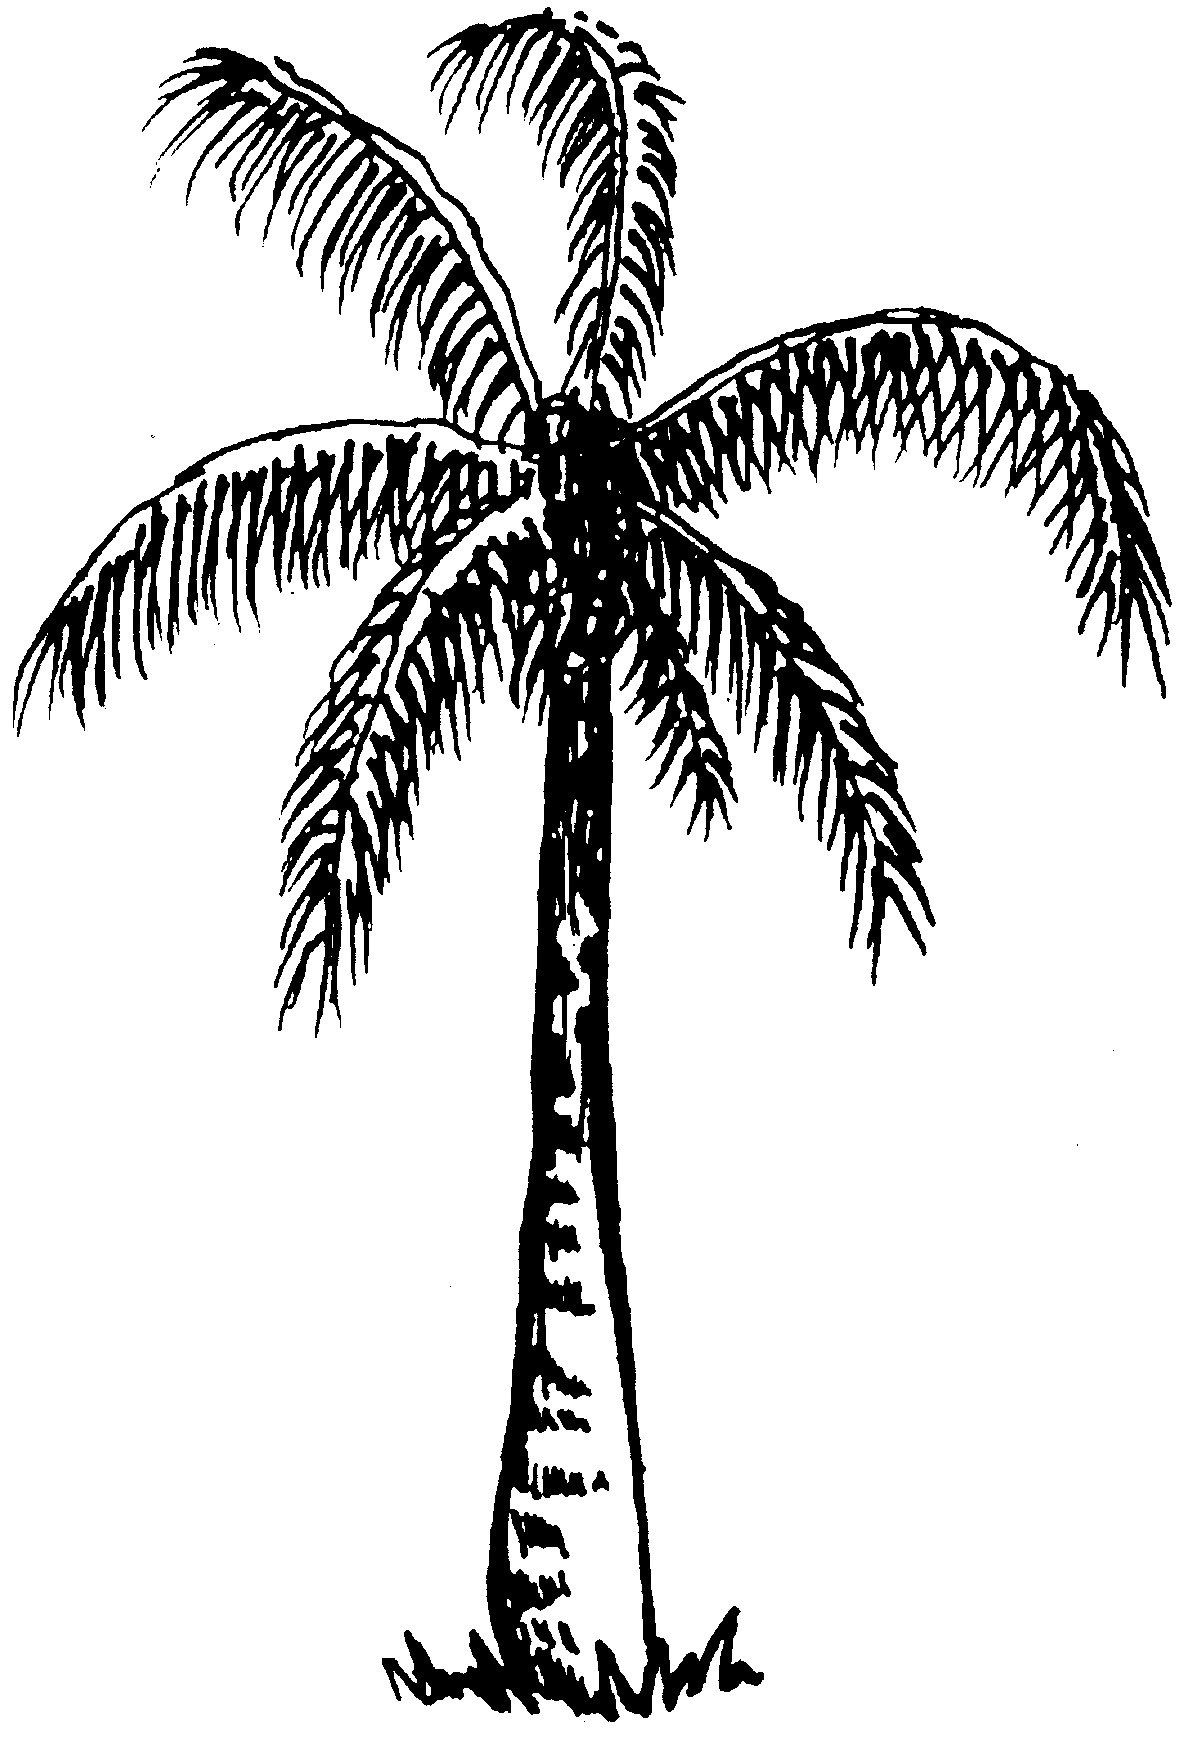 Clip Art Trees Black And White | Clipart Panda - Free Clipart Images